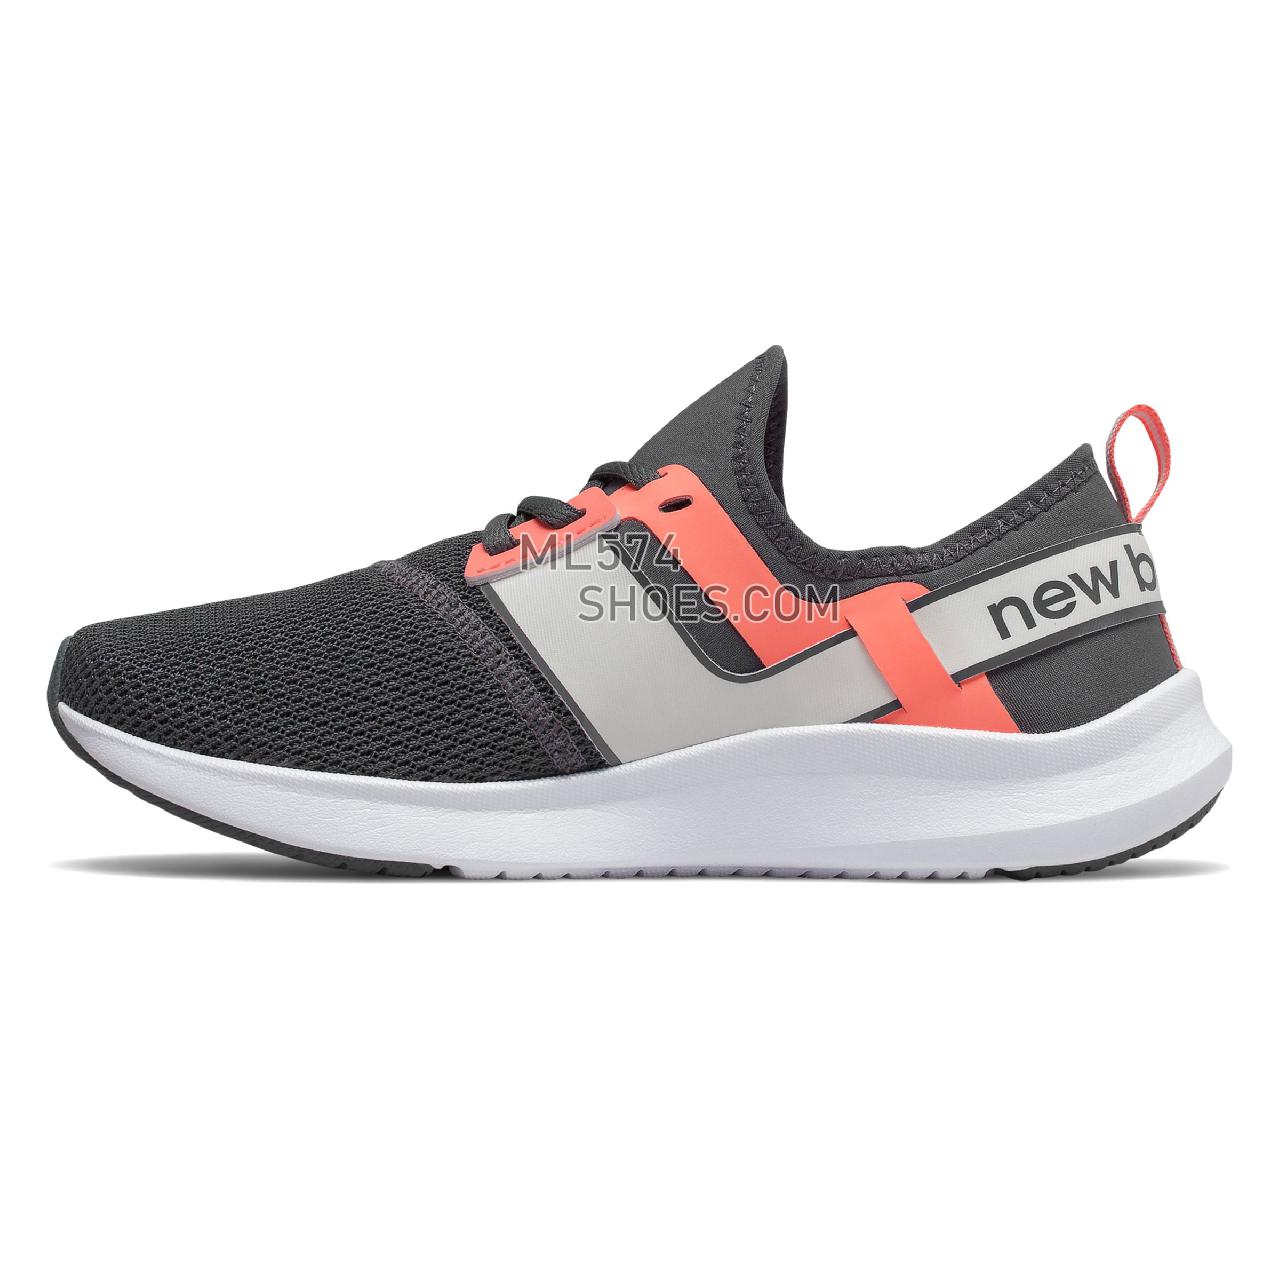 New Balance NB Nergize Sport - Women's Whats Trending - Lead with Sea Salt and Ginger Pink - WNRGSSS1